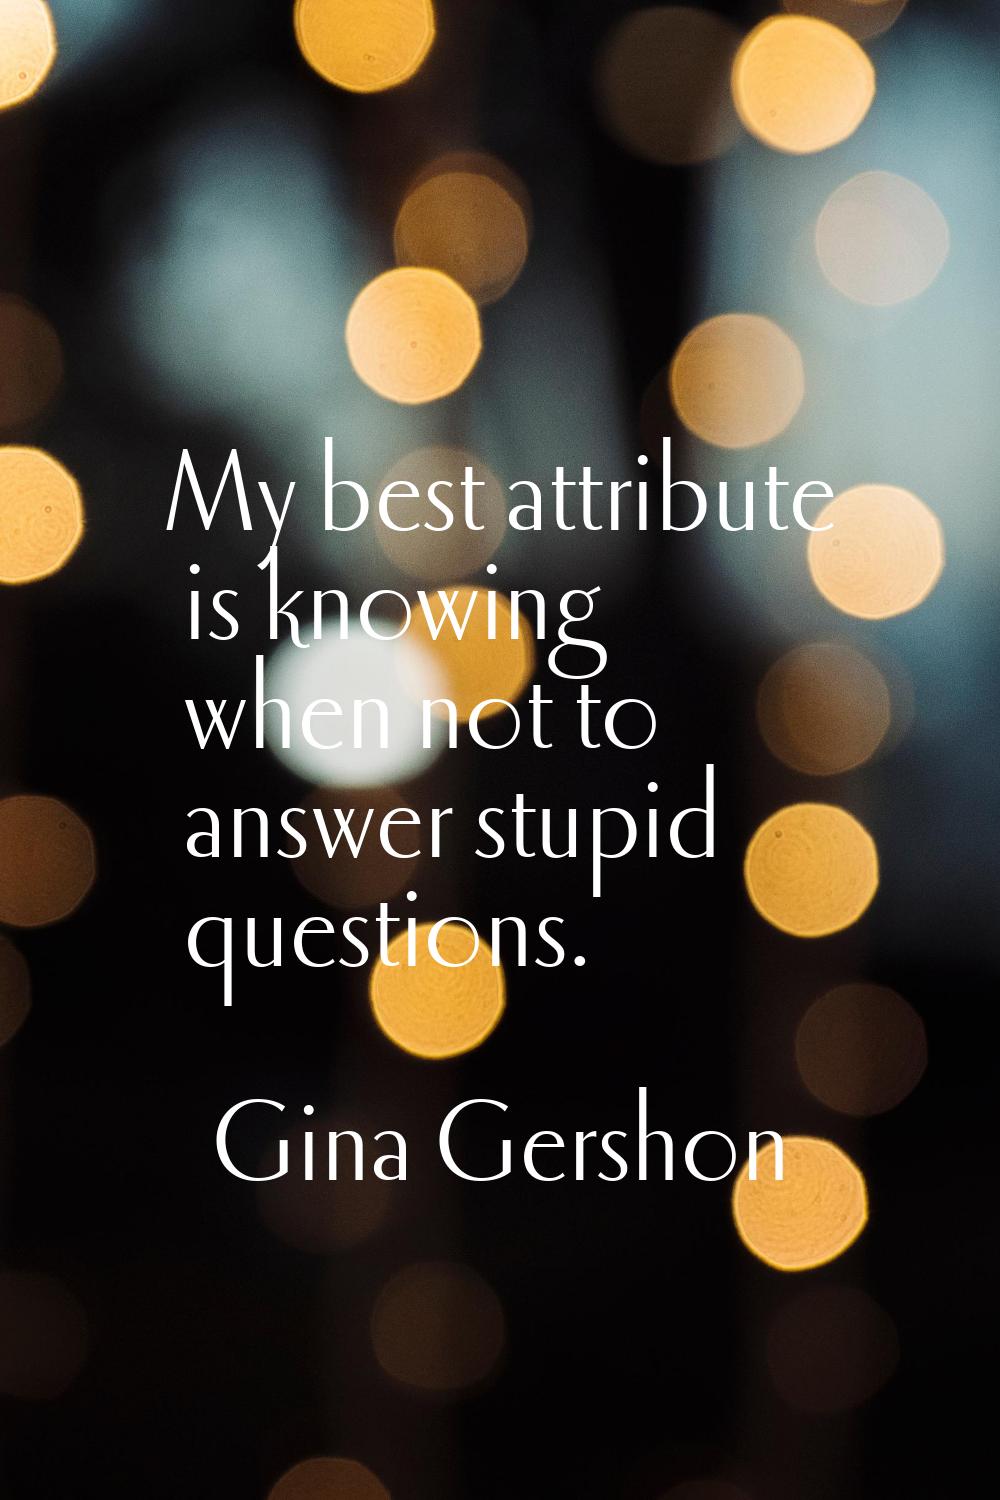 My best attribute is knowing when not to answer stupid questions.